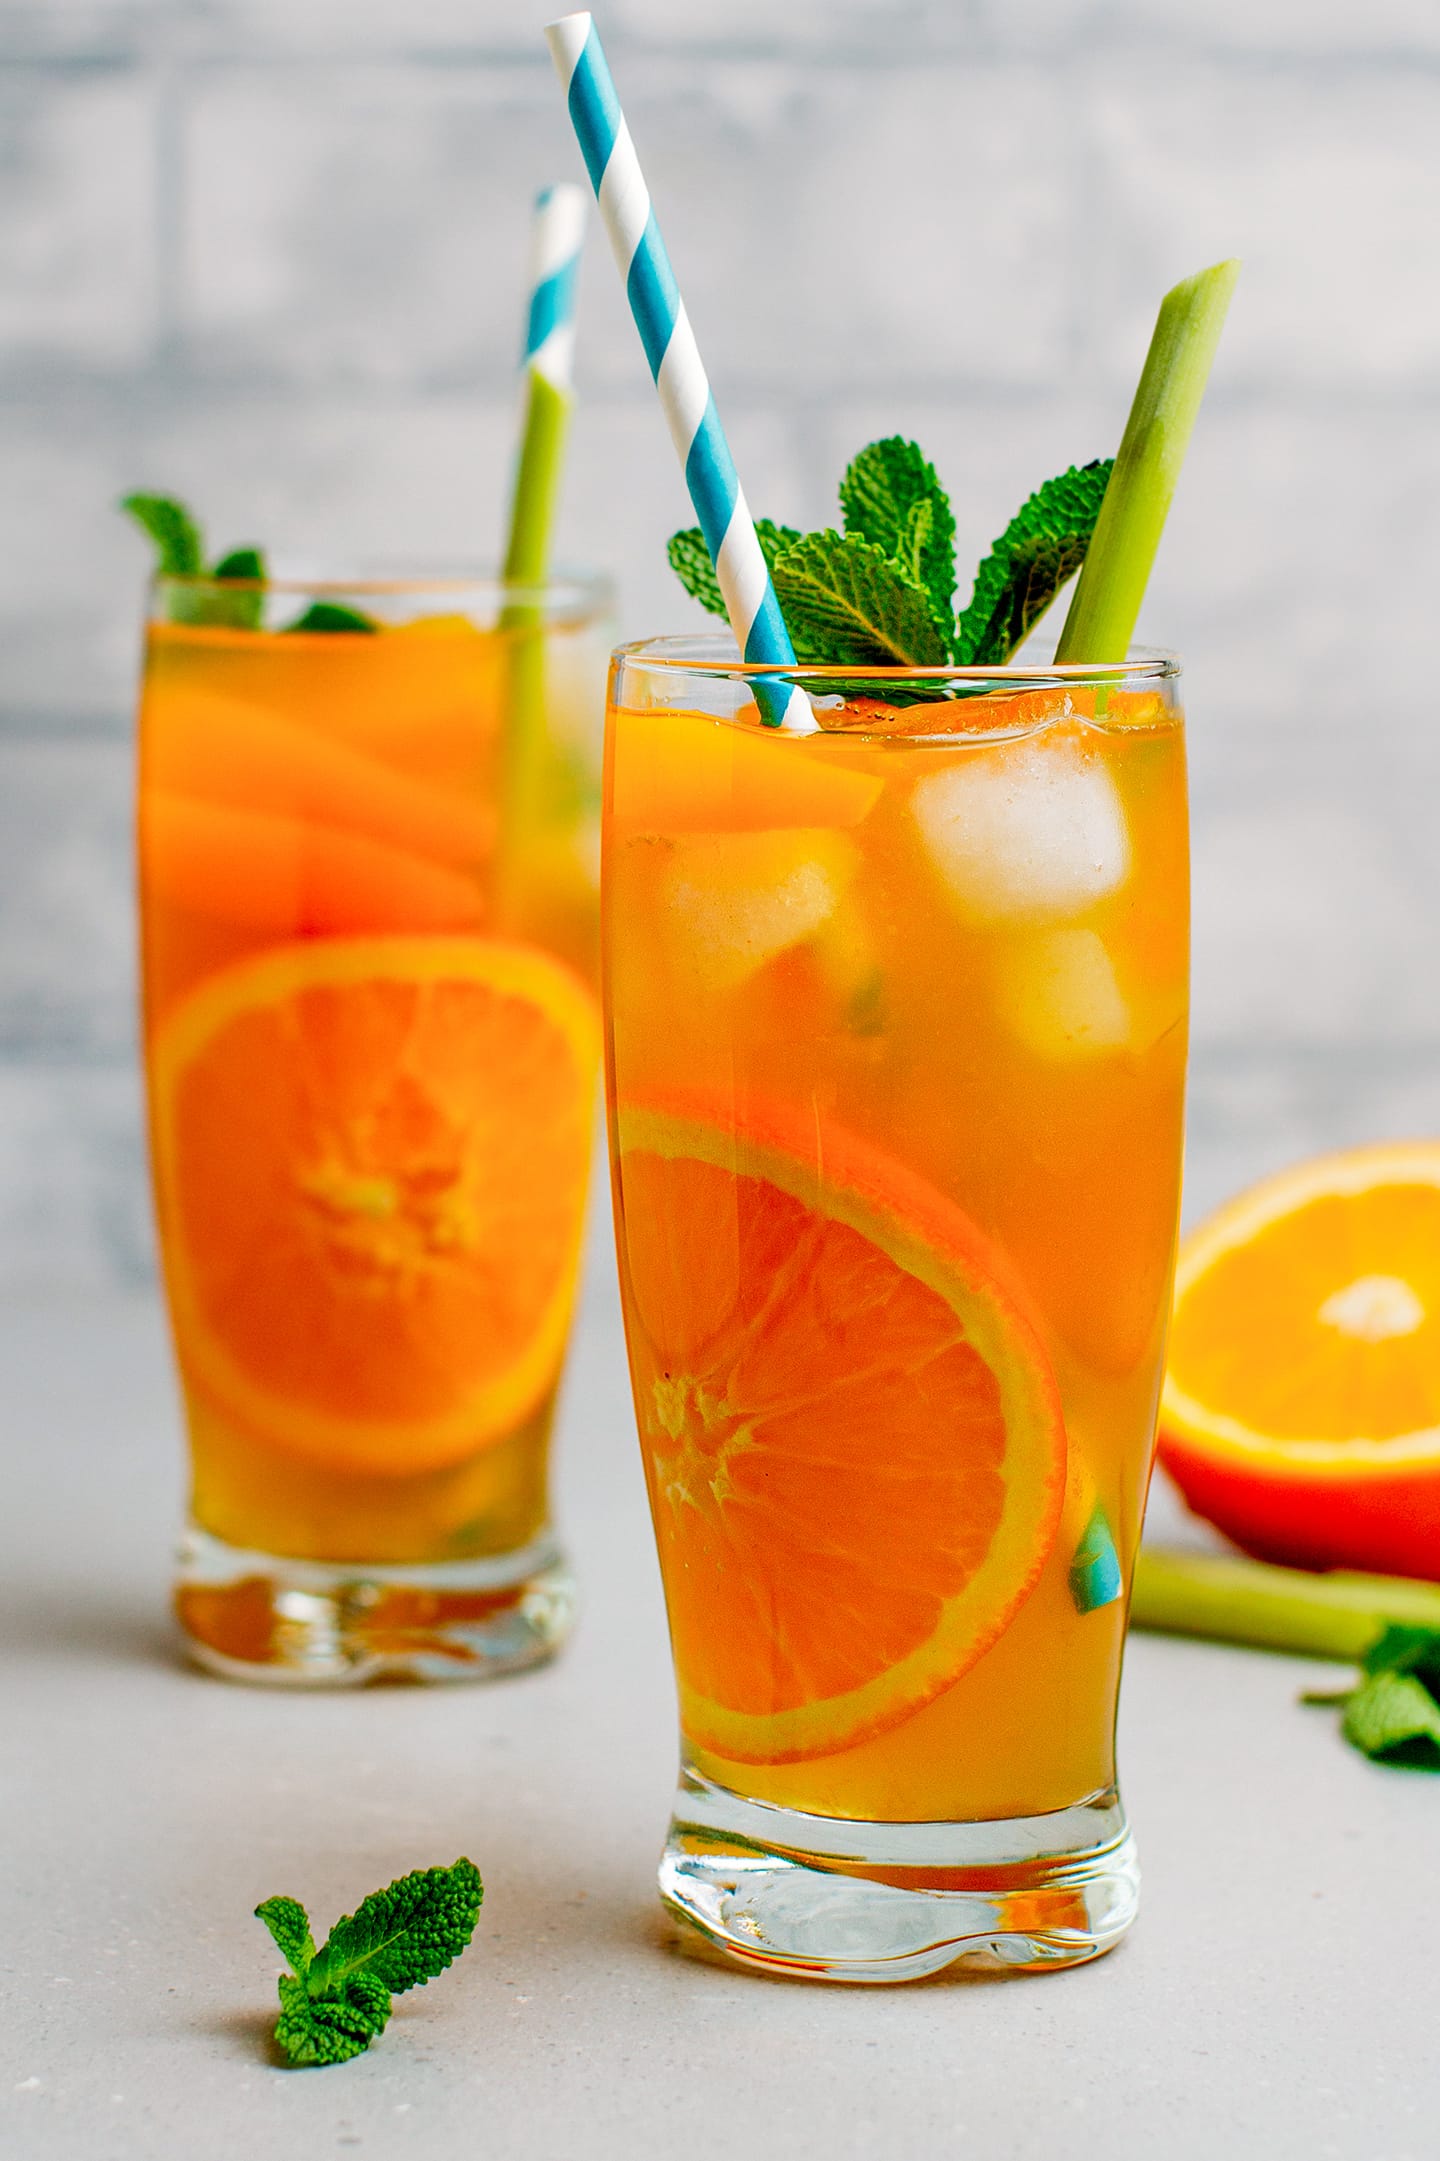 Two glasses of iced tea with orange slices, lemongrass, and mint leaves.